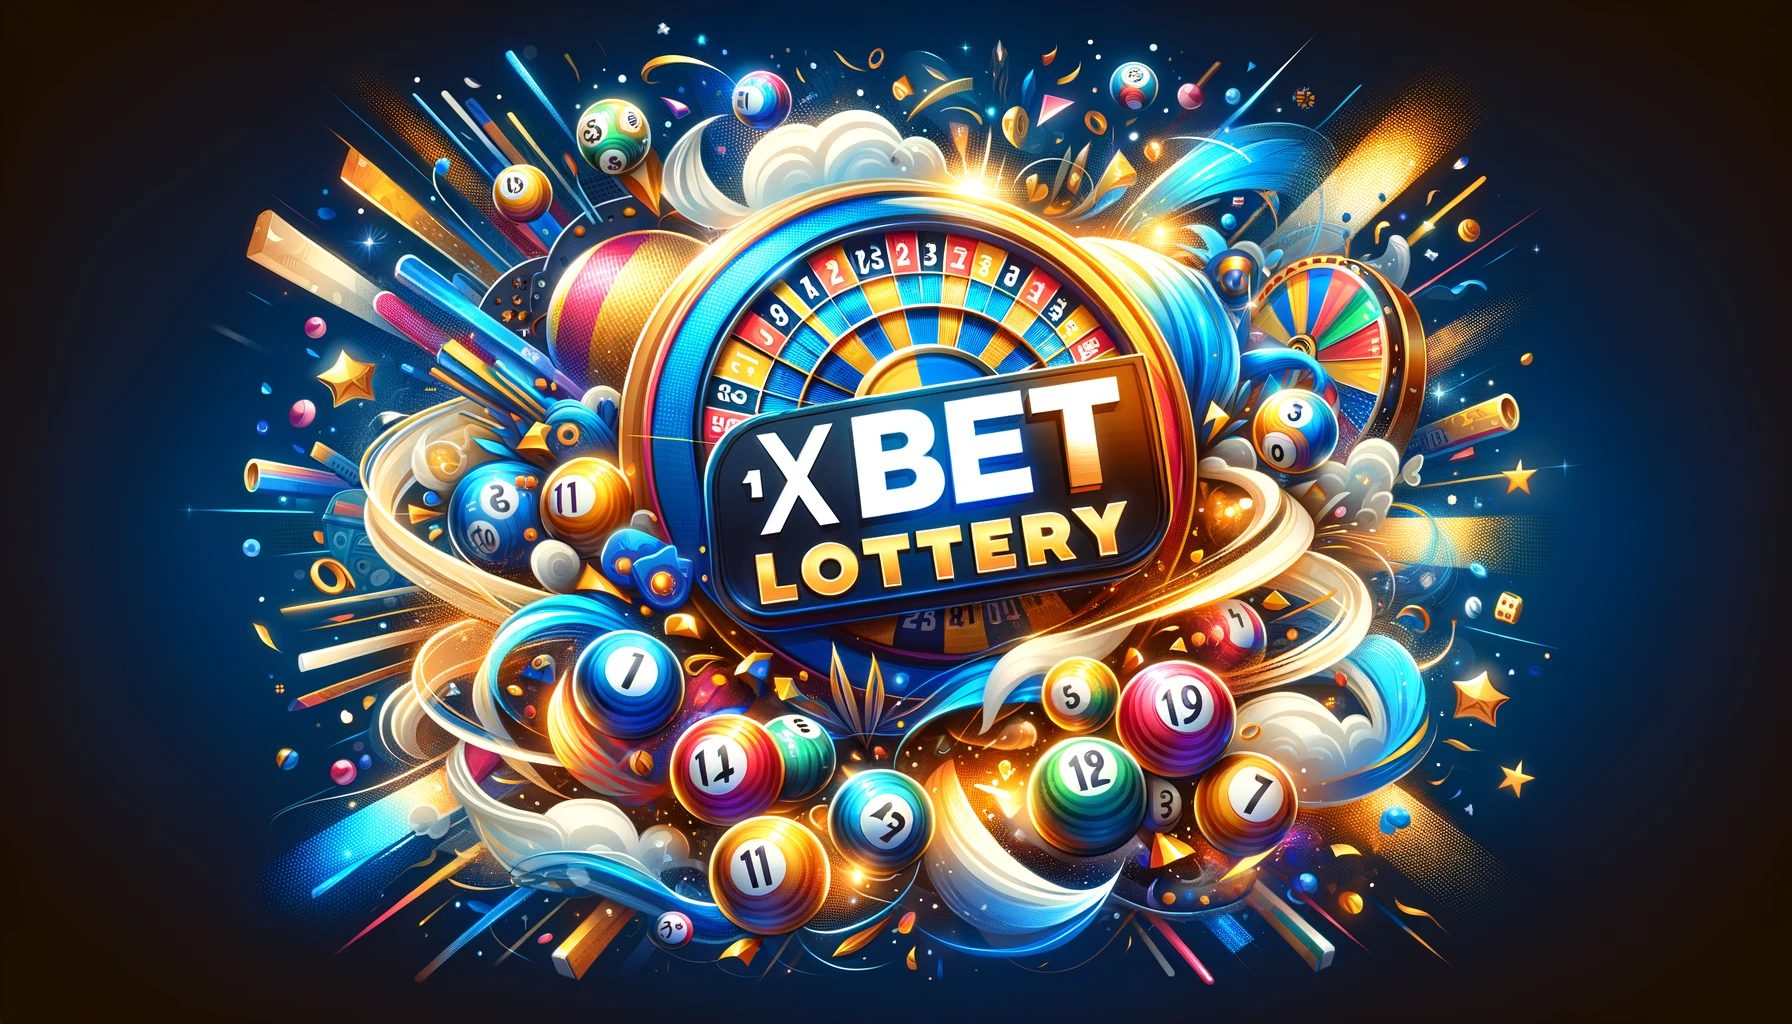 1xBet Lottery: Your Ultimate Guide to Winning Big